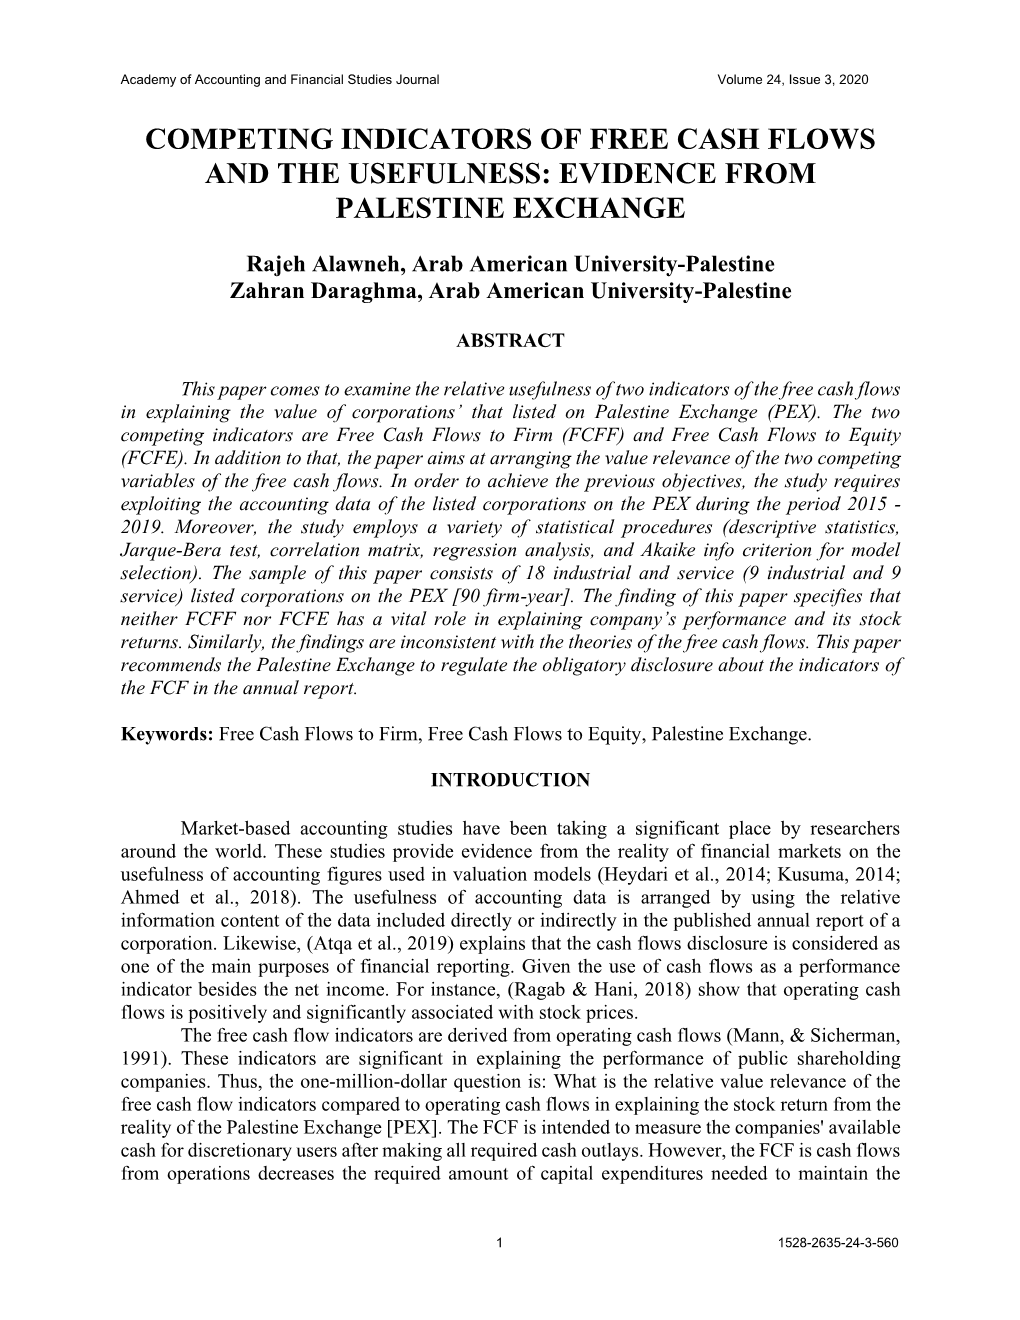 Competing Indicators of Free Cash Flows and the Usefulness: Evidence from Palestine Exchange